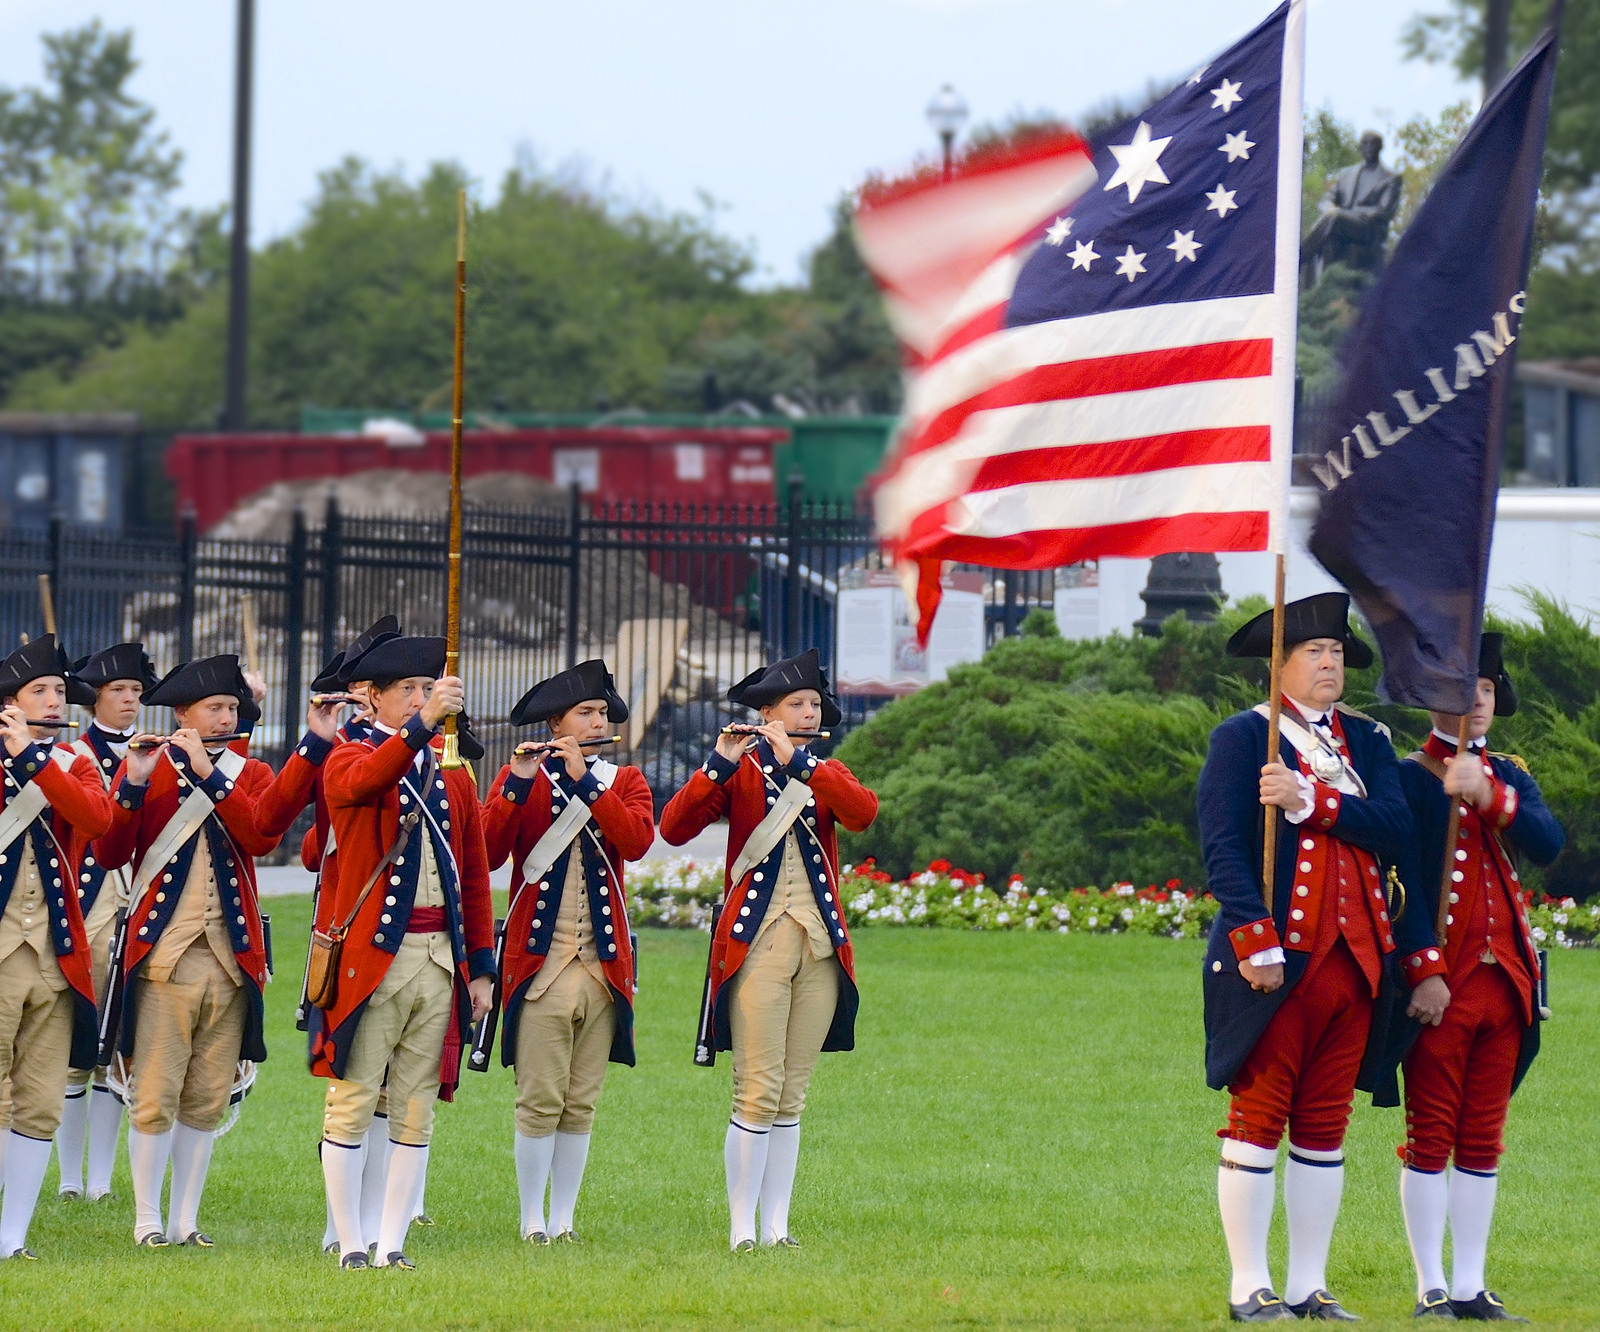 Williamsburg Fife and Drum Corps by Flickr user Jamie McCaffrey (CC BY-NC 2.0)